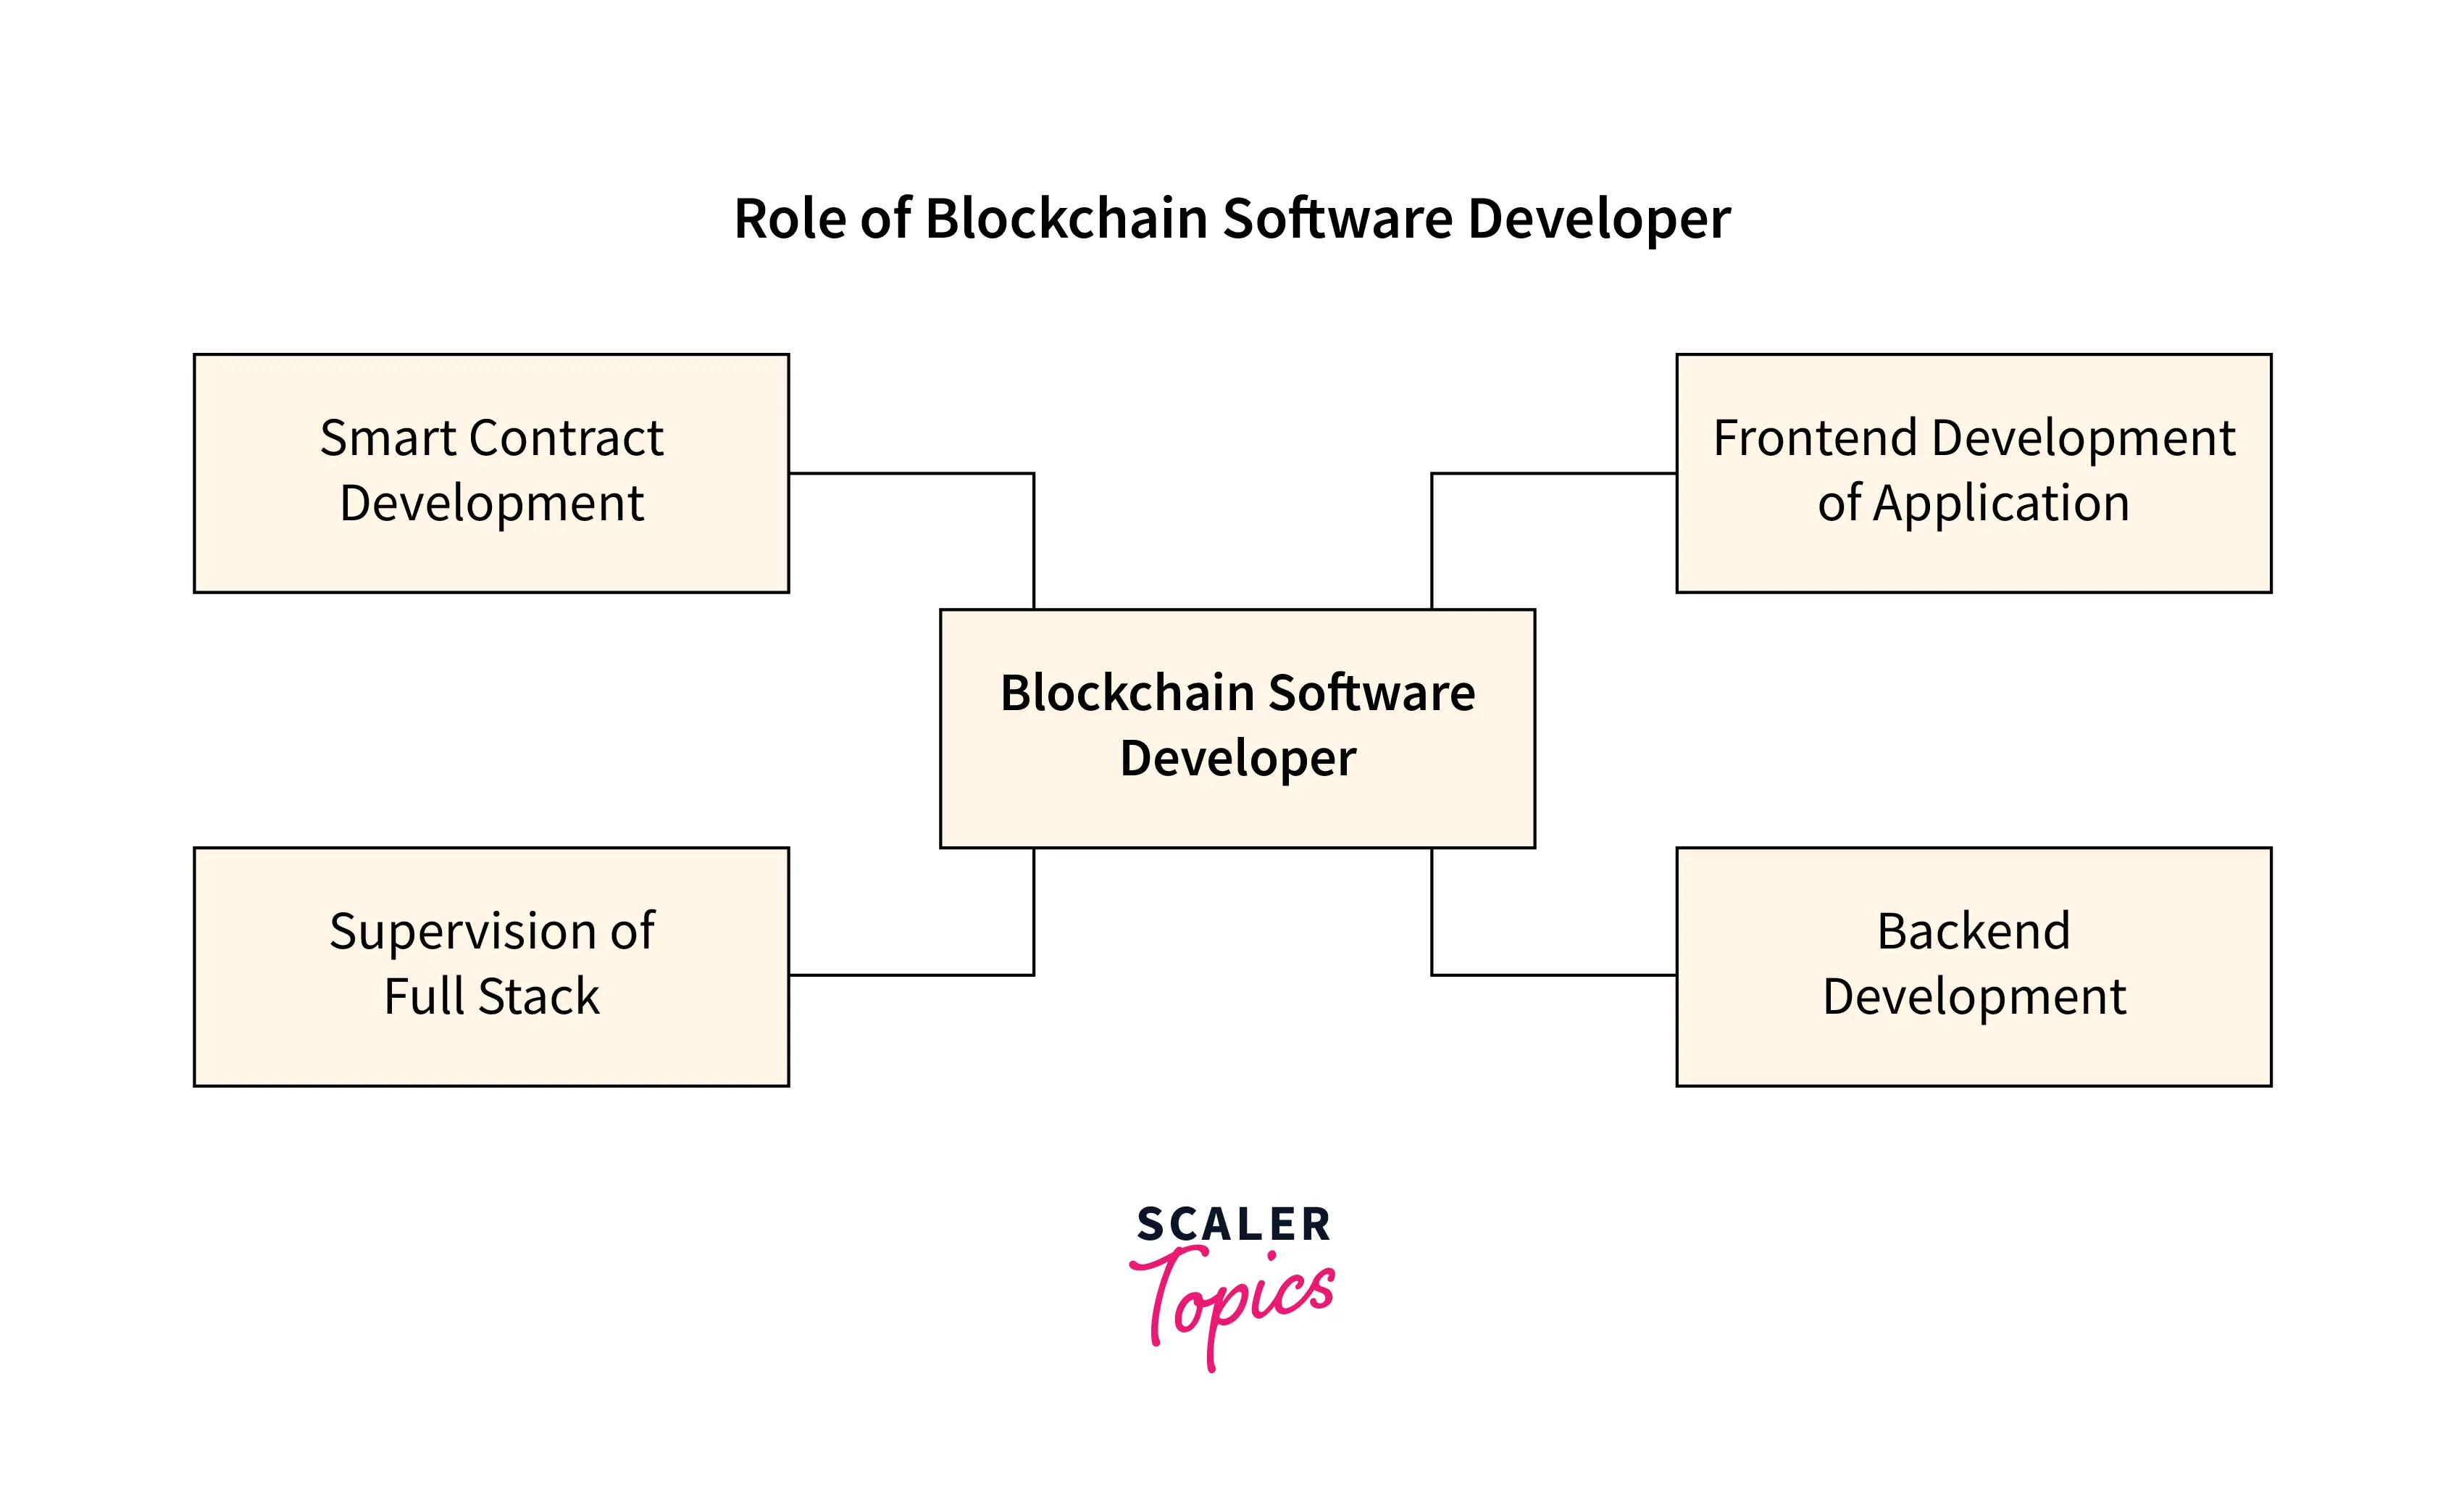 Role of Blockchain Software Developers